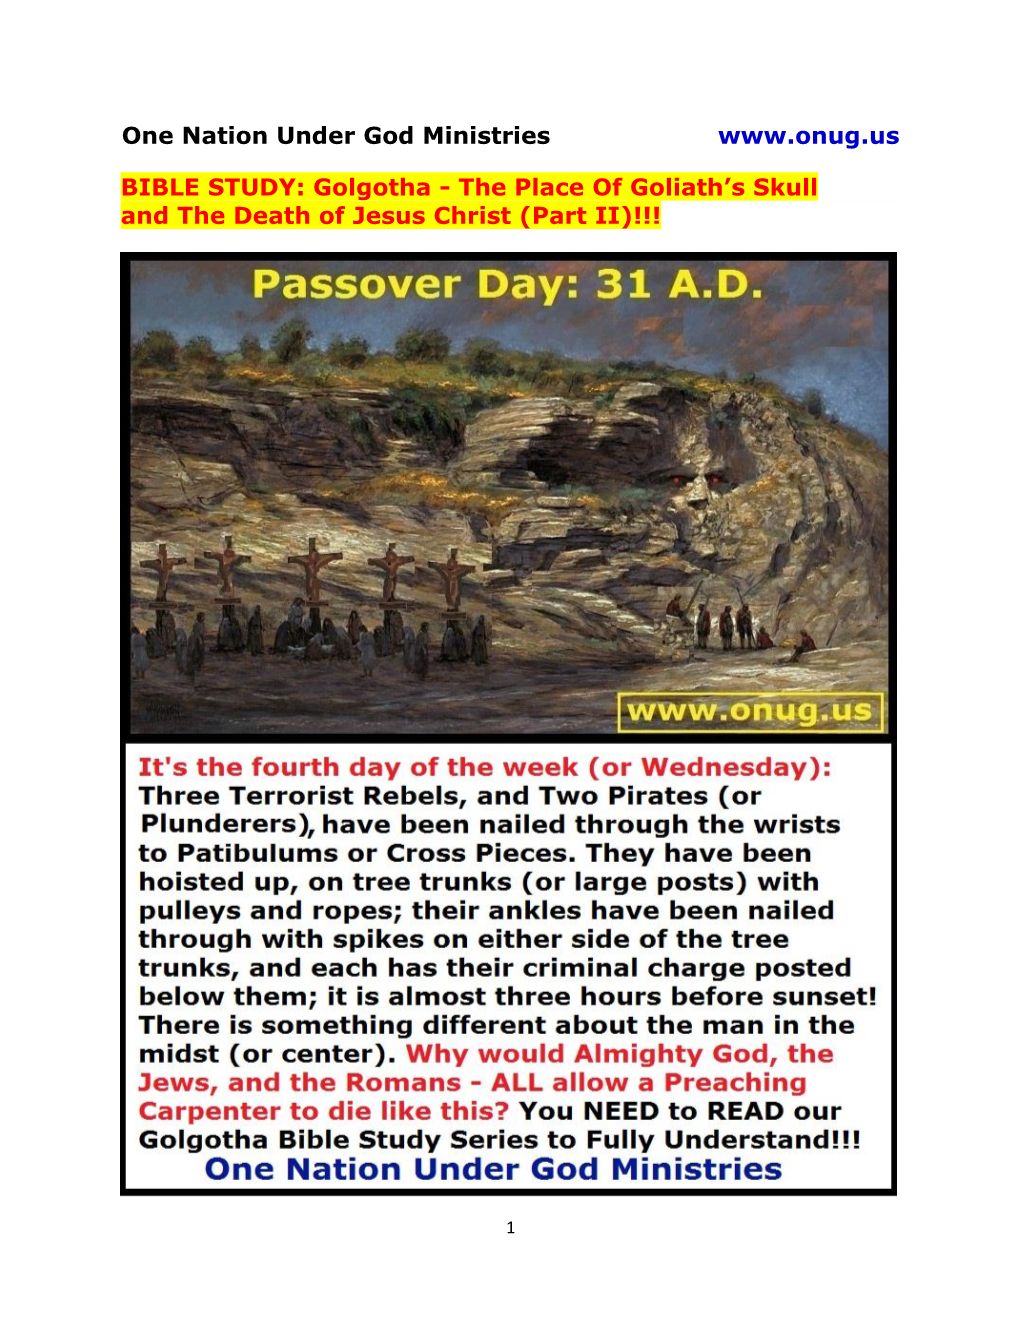 BIBLE STUDY: Golgotha - the Place of Goliath’S Skull and the Death of Jesus Christ (Part II)!!!